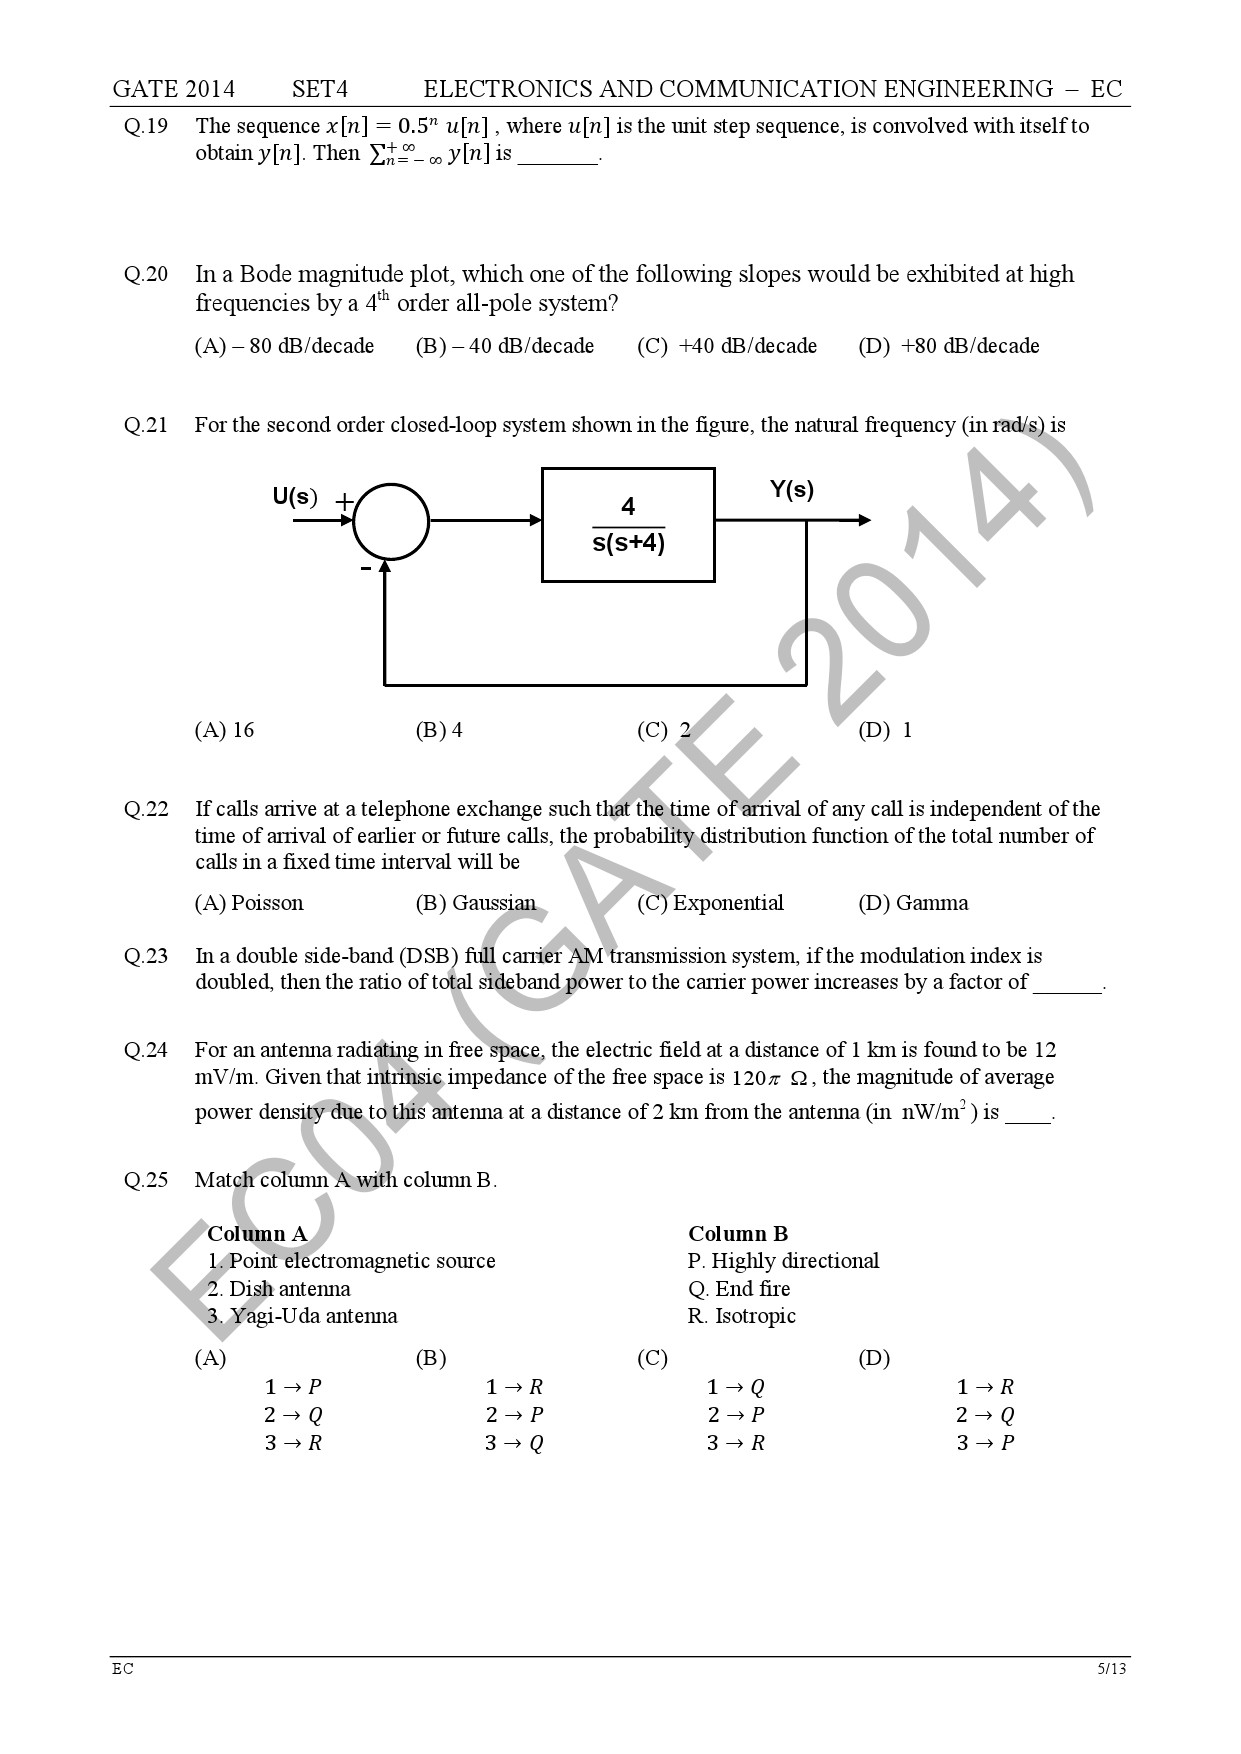 GATE Exam Question Paper 2014 Electronics and Communication Engineering Set 4 11